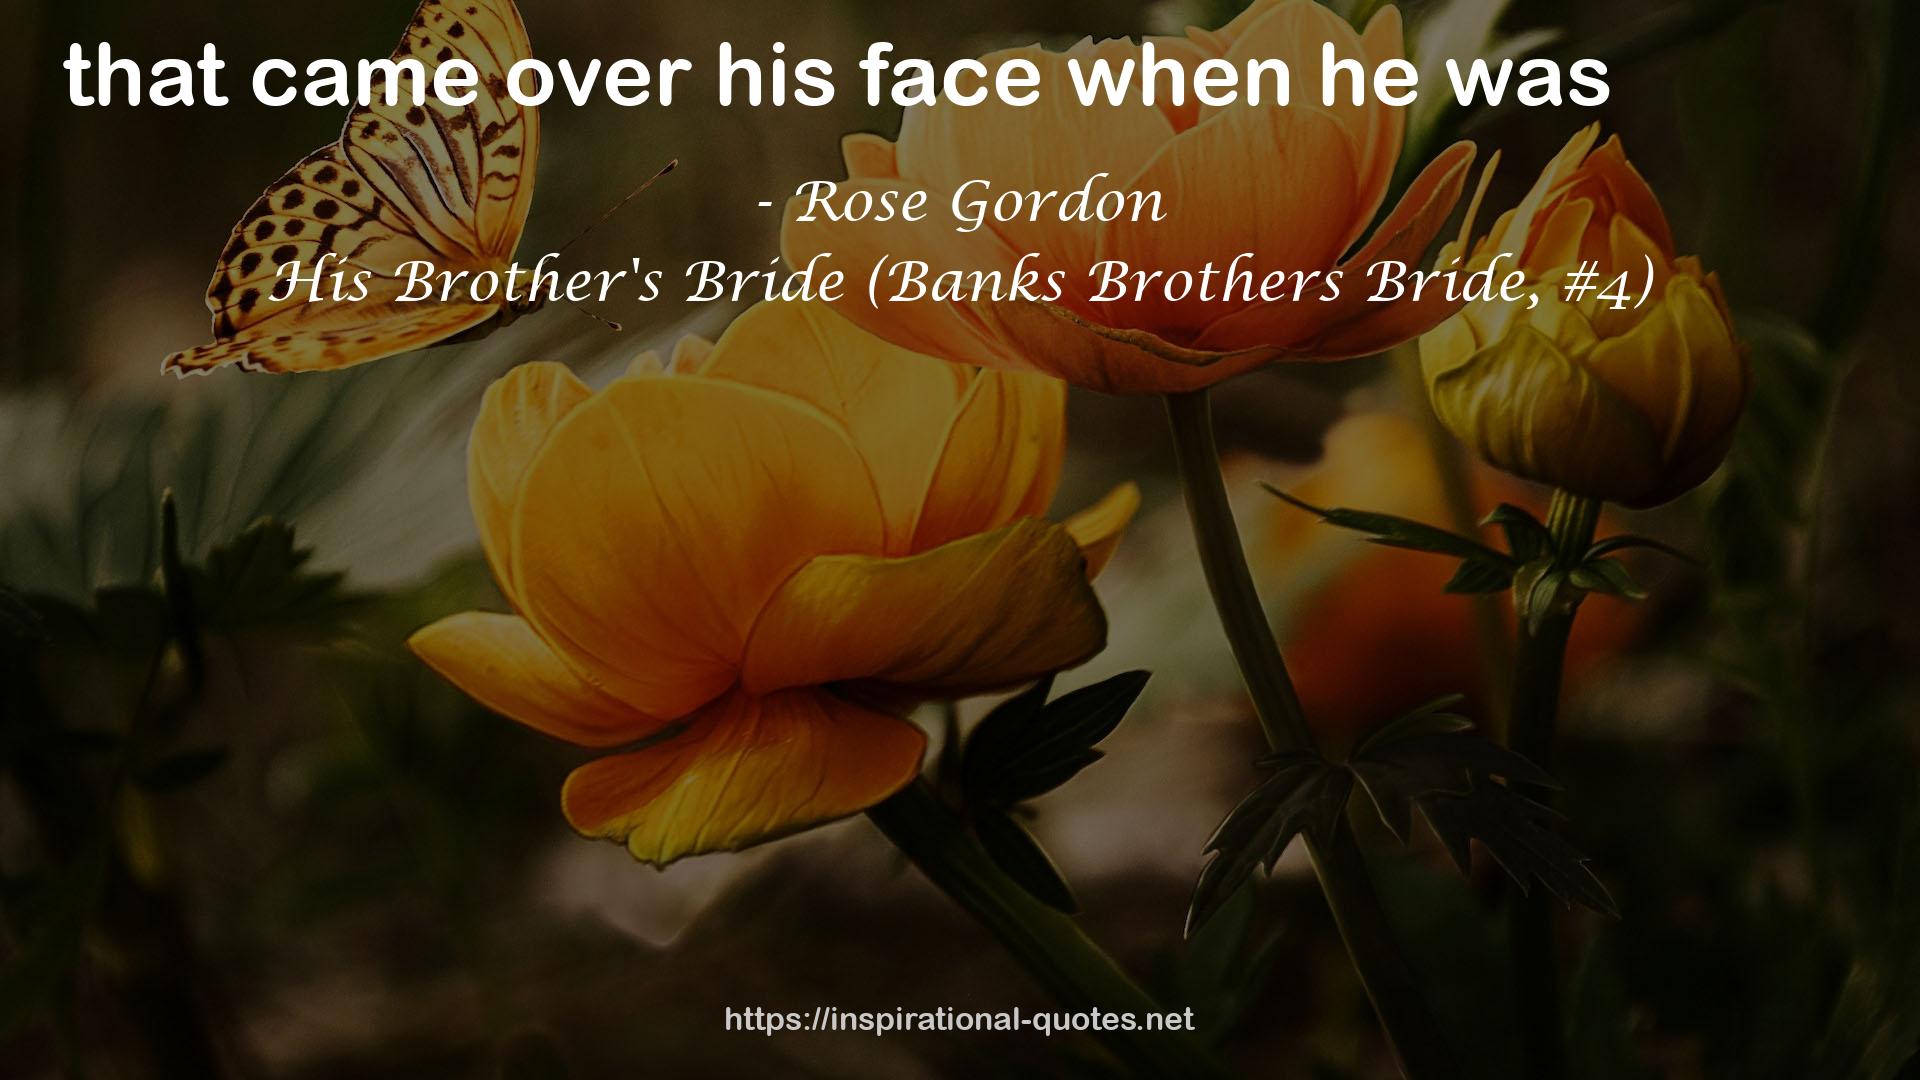 His Brother's Bride (Banks Brothers Bride, #4) QUOTES